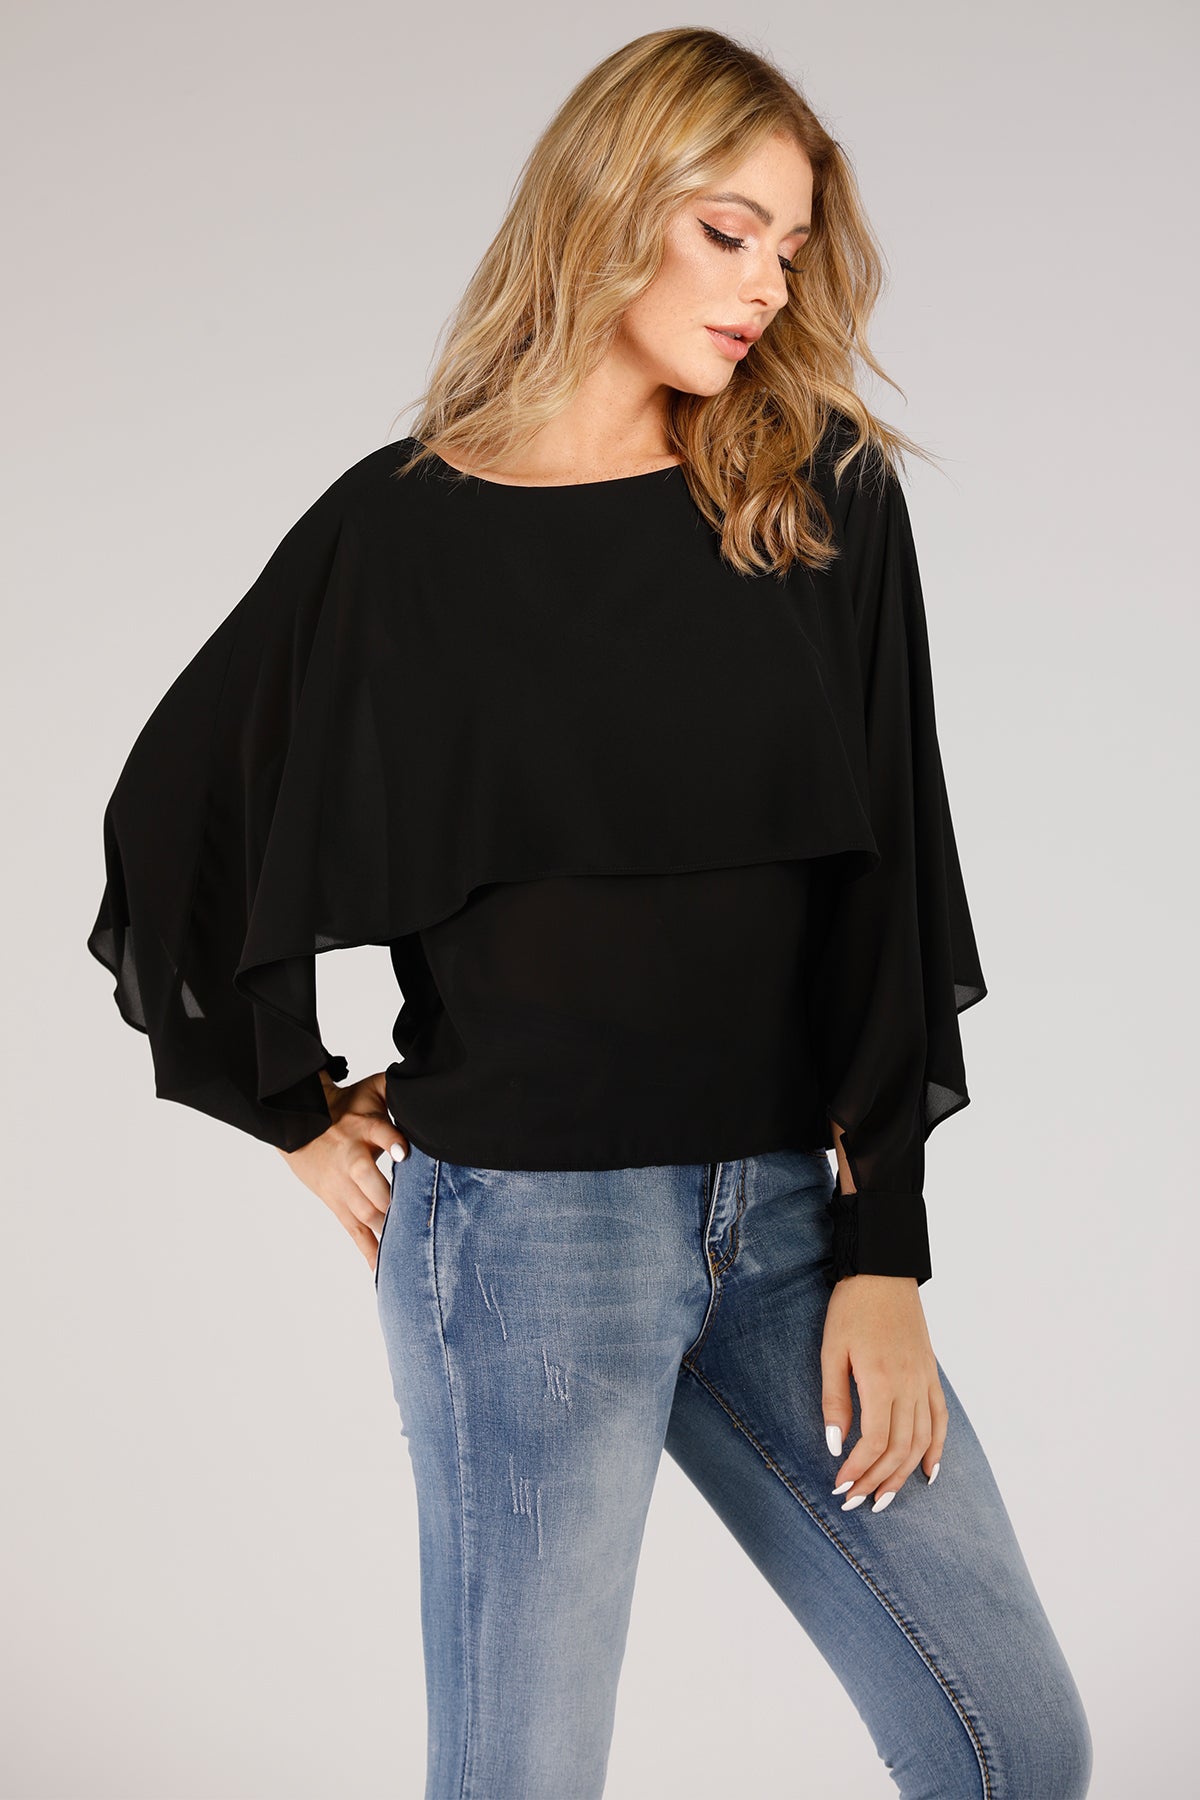 Blouse With Overlay And Open Sleeves Cuff